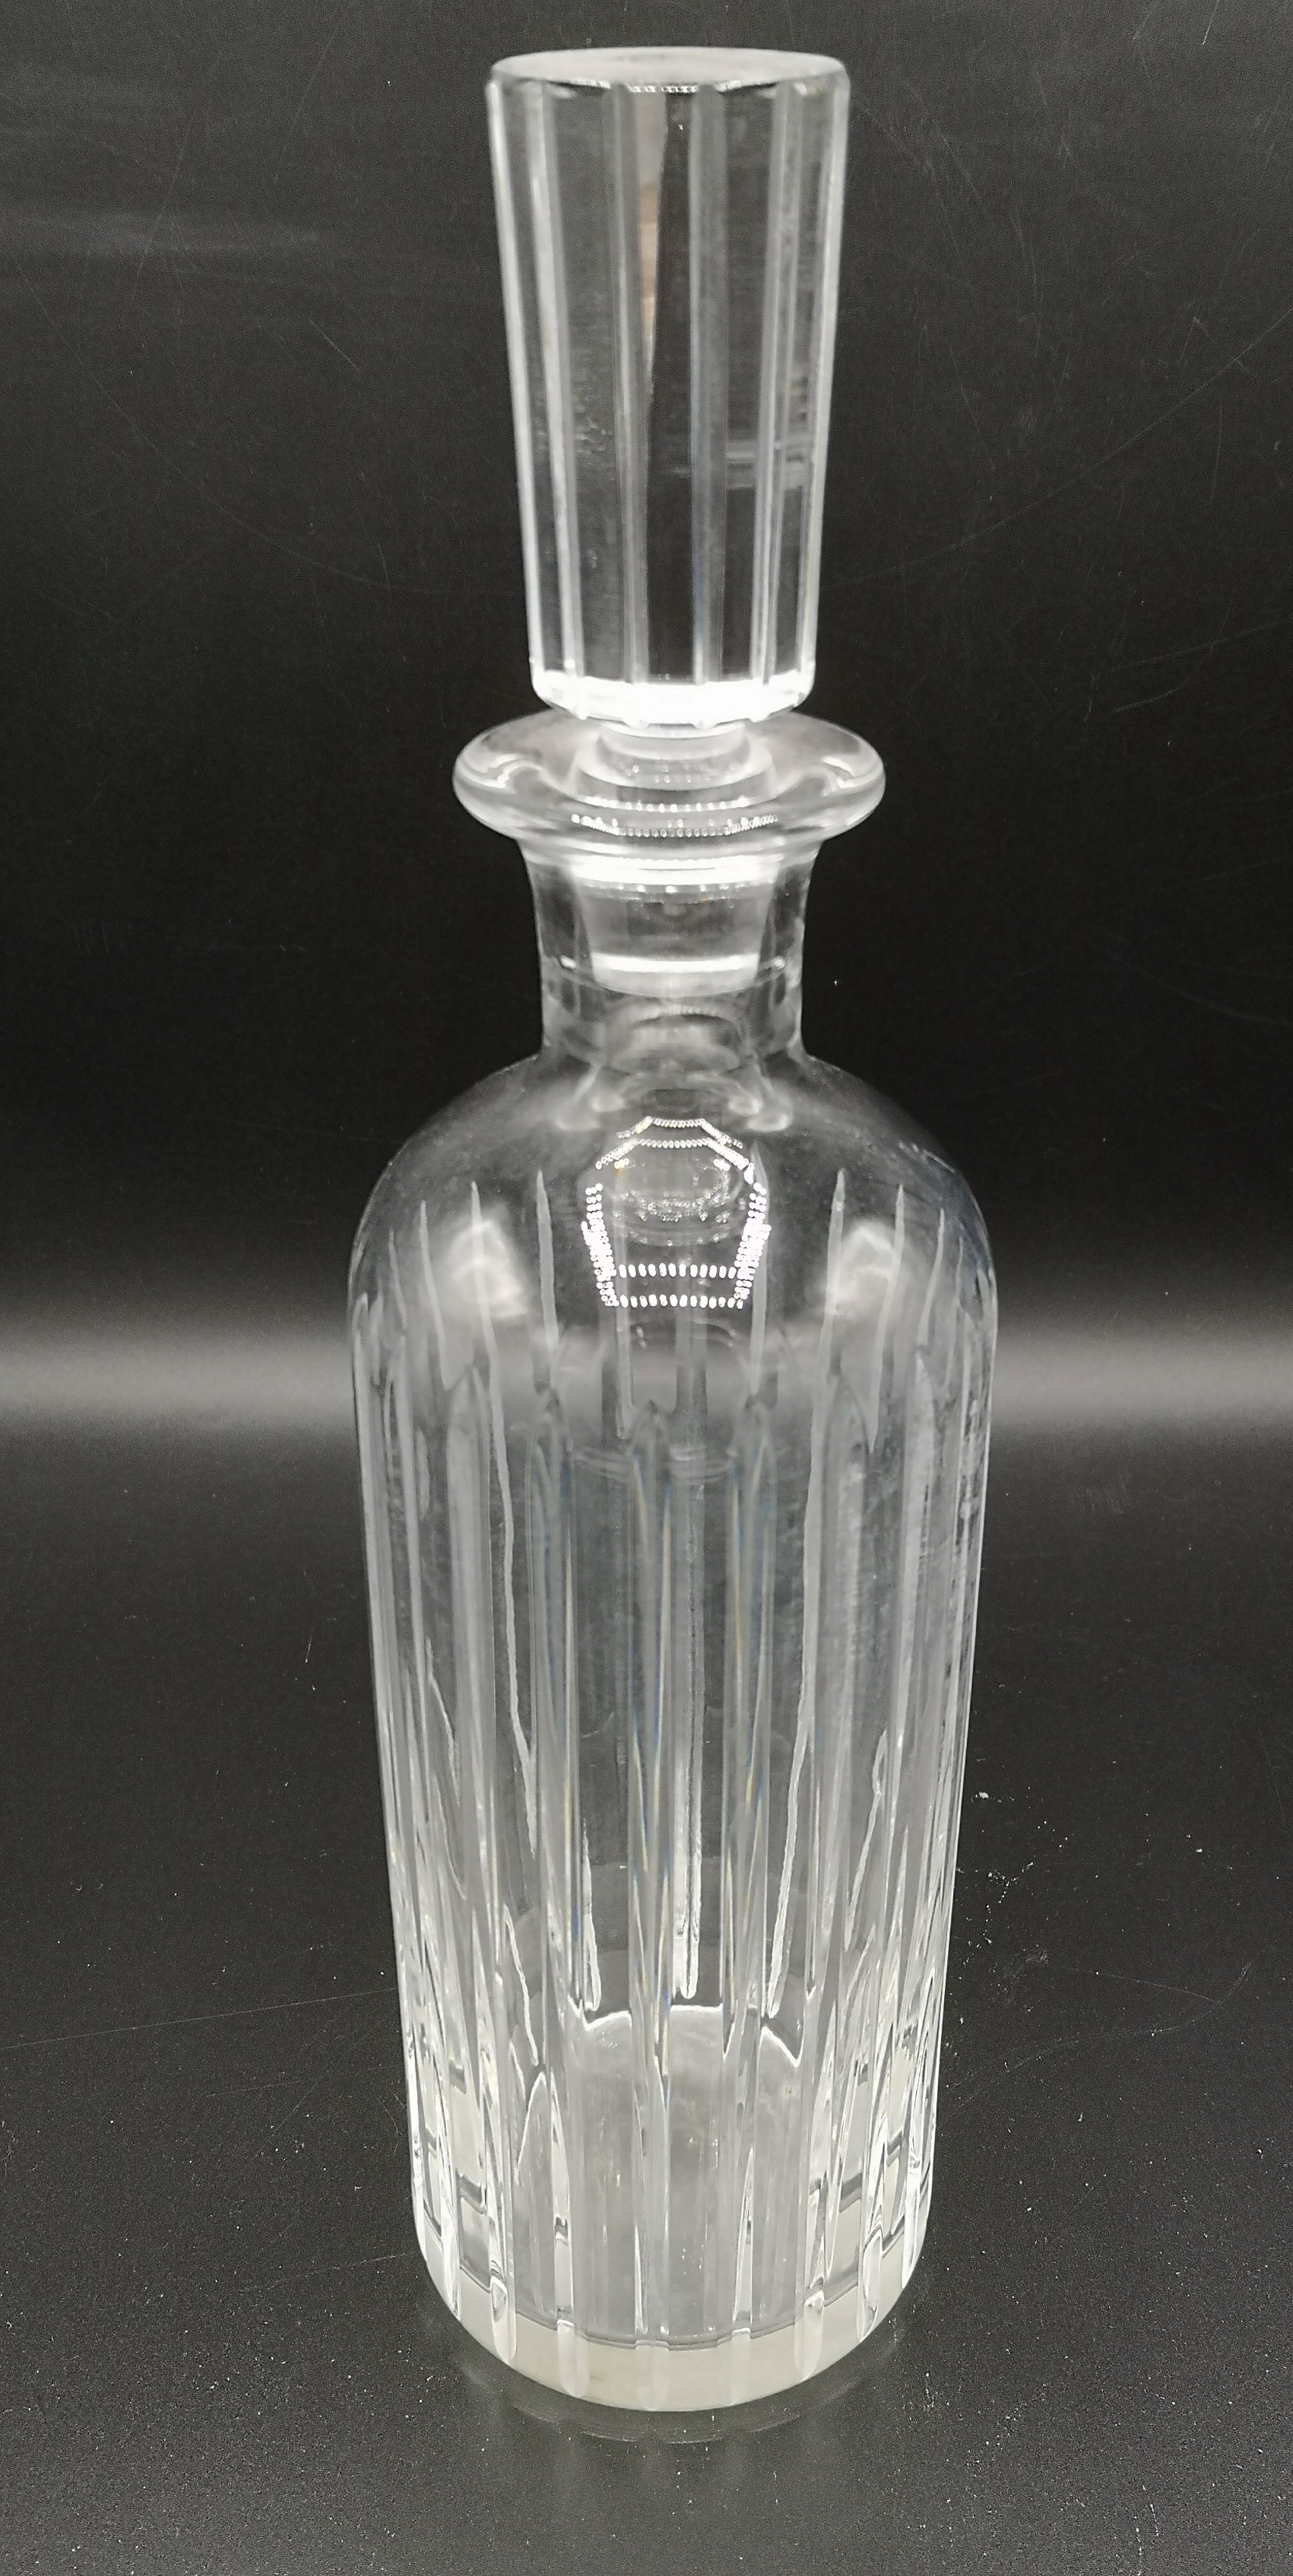 Baccarat glass decanter - Image 5 of 5